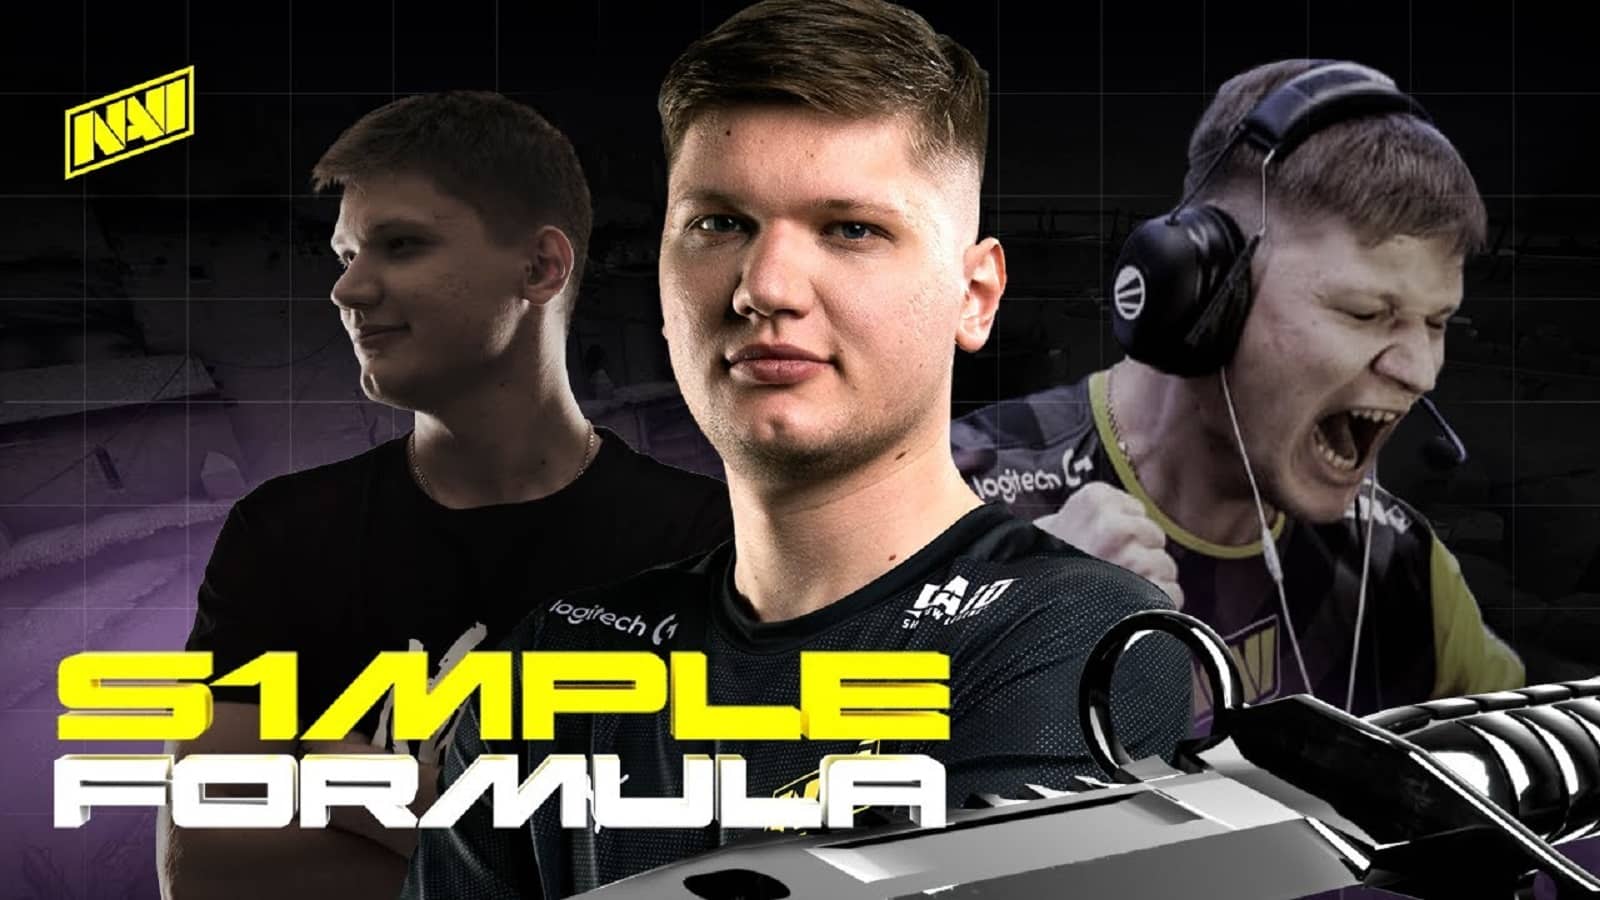 Oleksandr 's1mple' Kostyliev's Counter-Strike Player Profile